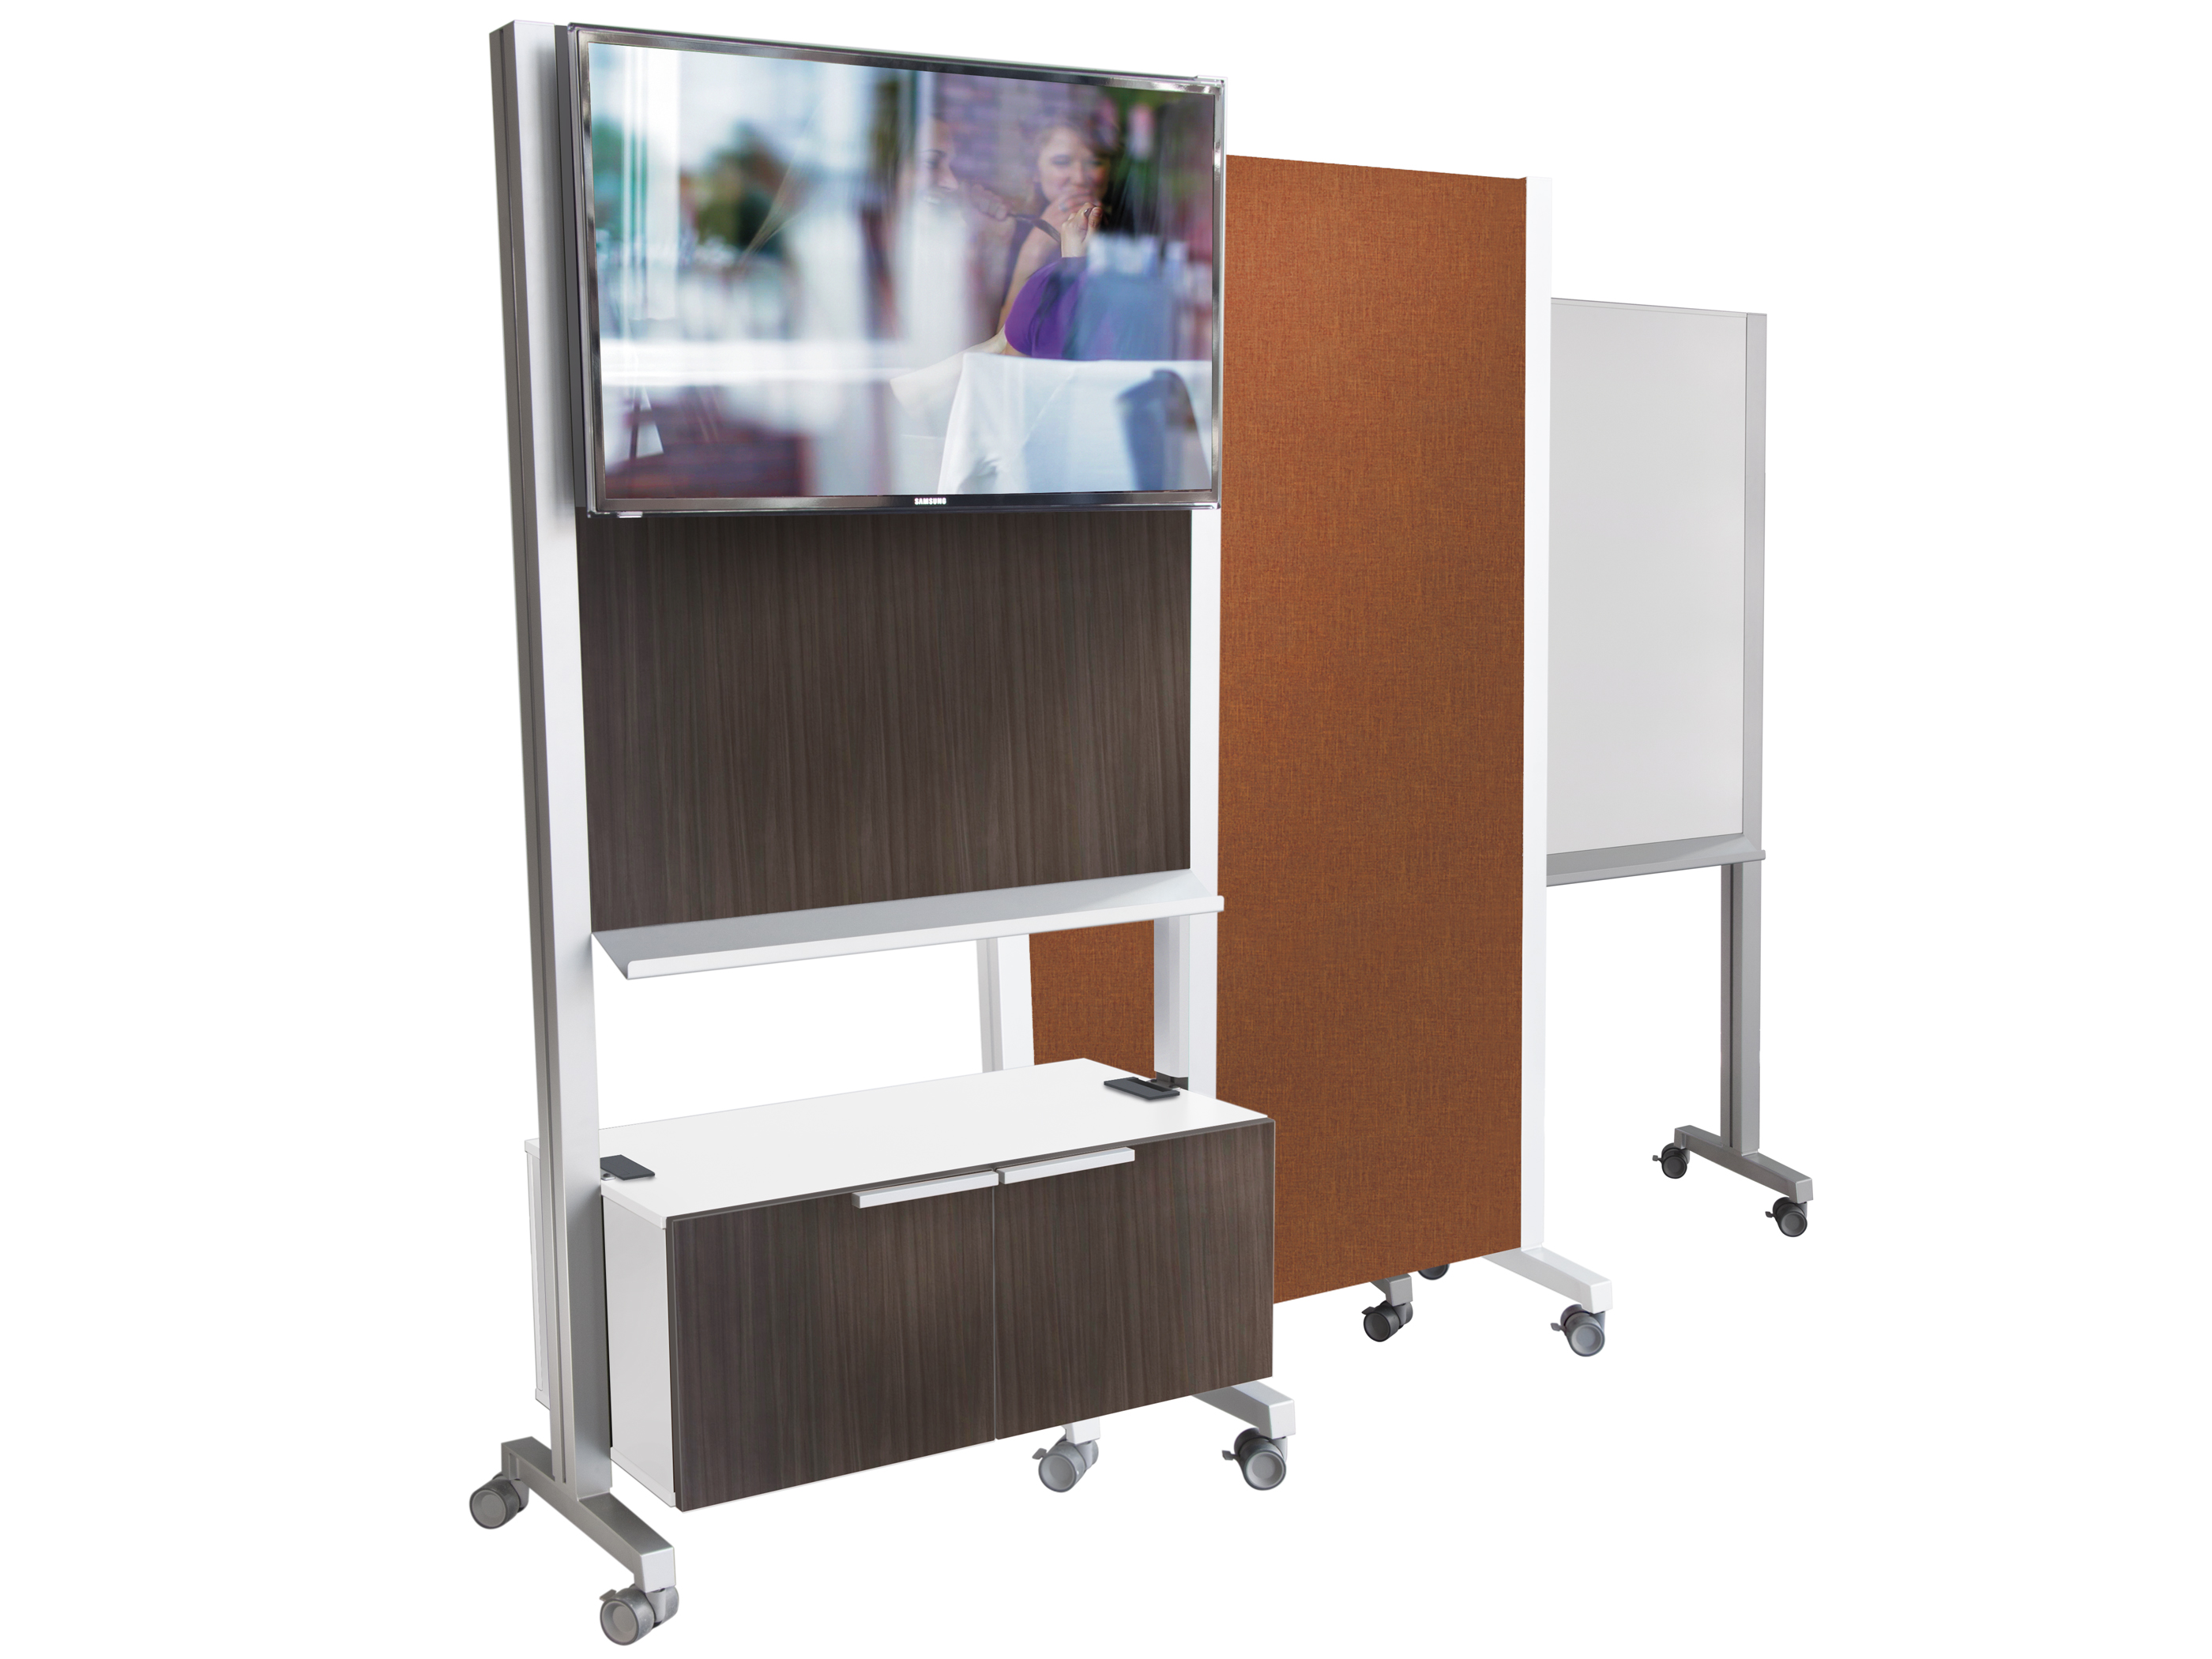 Dewey by SurfaceWorks media cart, divider screen, and whiteboard